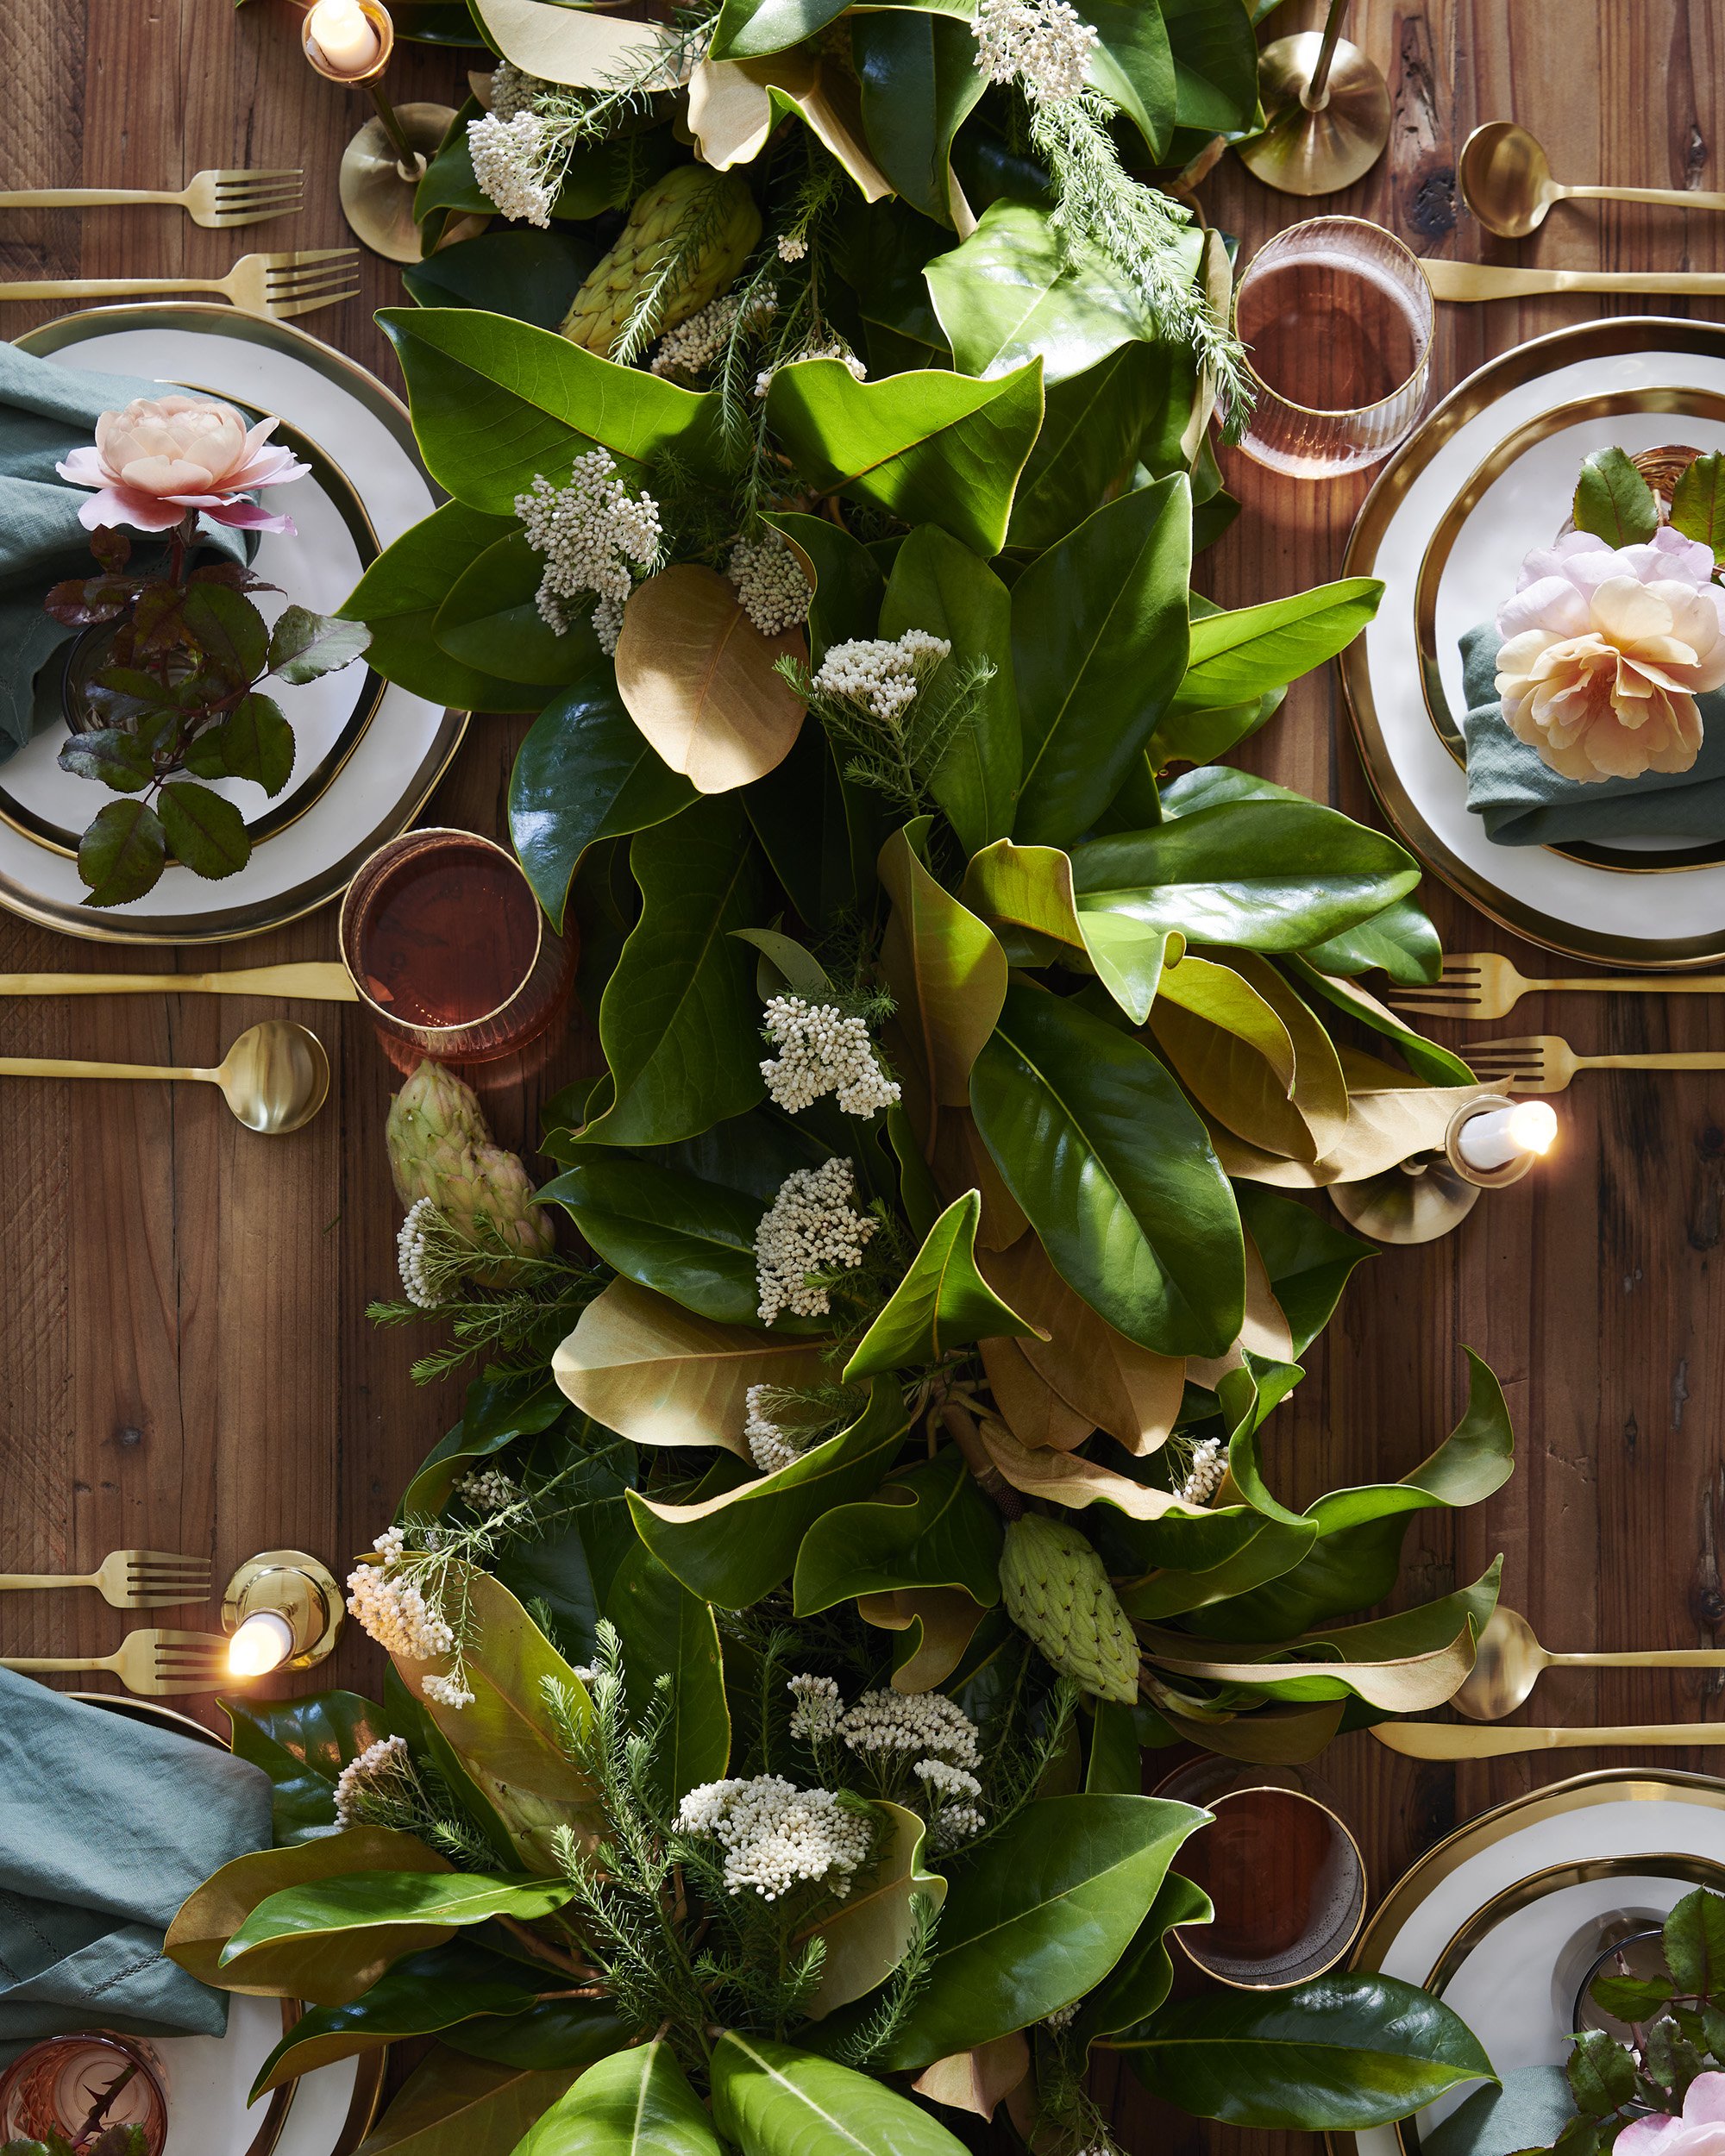 YoureInvited_HolidayGathering_Tablescape3_Social_P_4x5.jpg